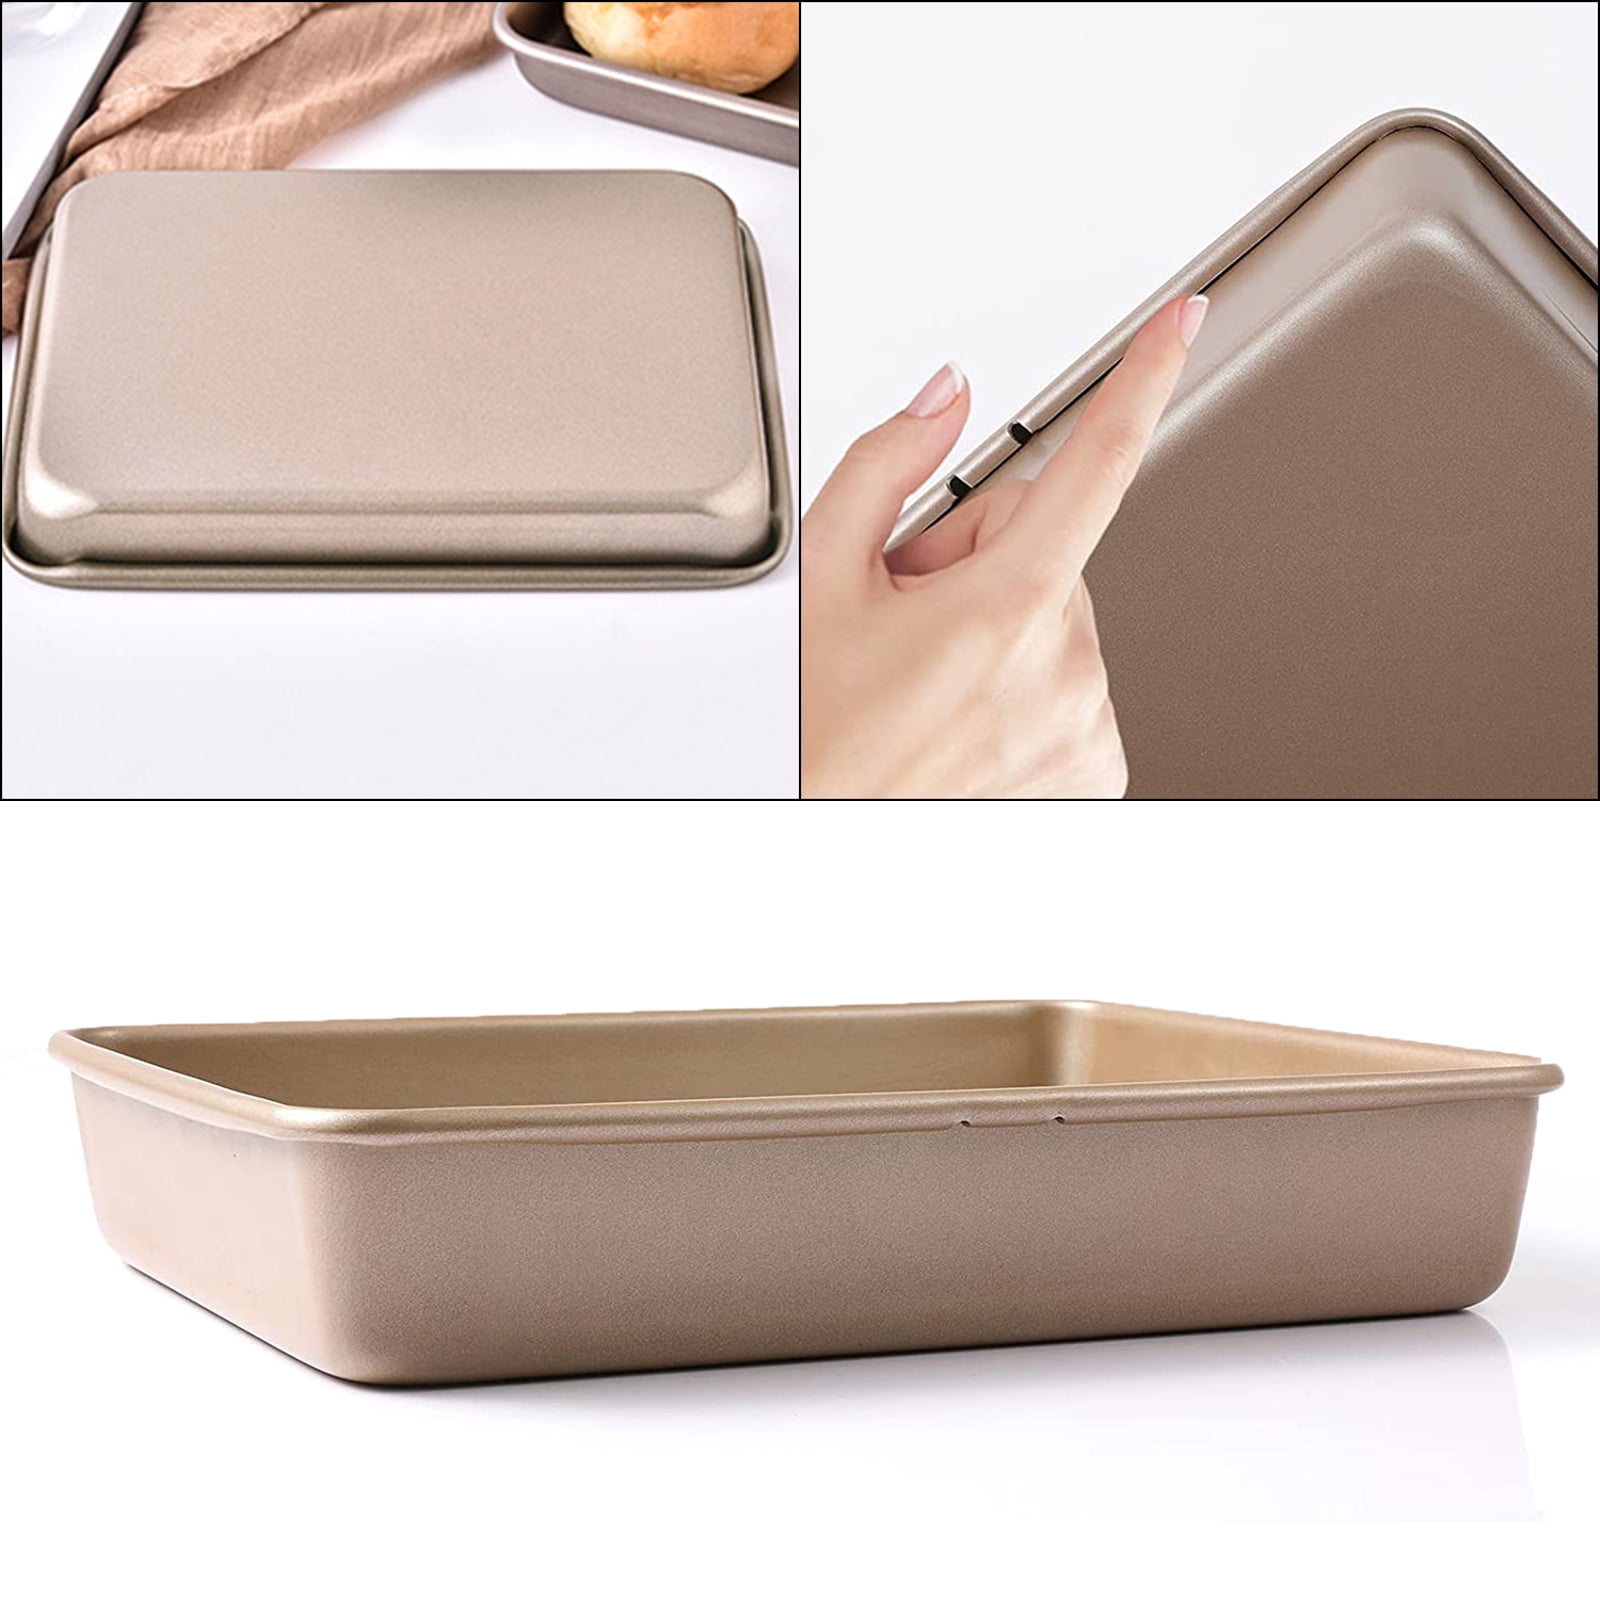 Small Baking Pan with Lid,Deep Baking Tray with Cover,Bexikou 9.4”x 7” x 2”  Stainless Steel Rectangle Sheet Cake Pans for Toaster Oven, Metal Covered